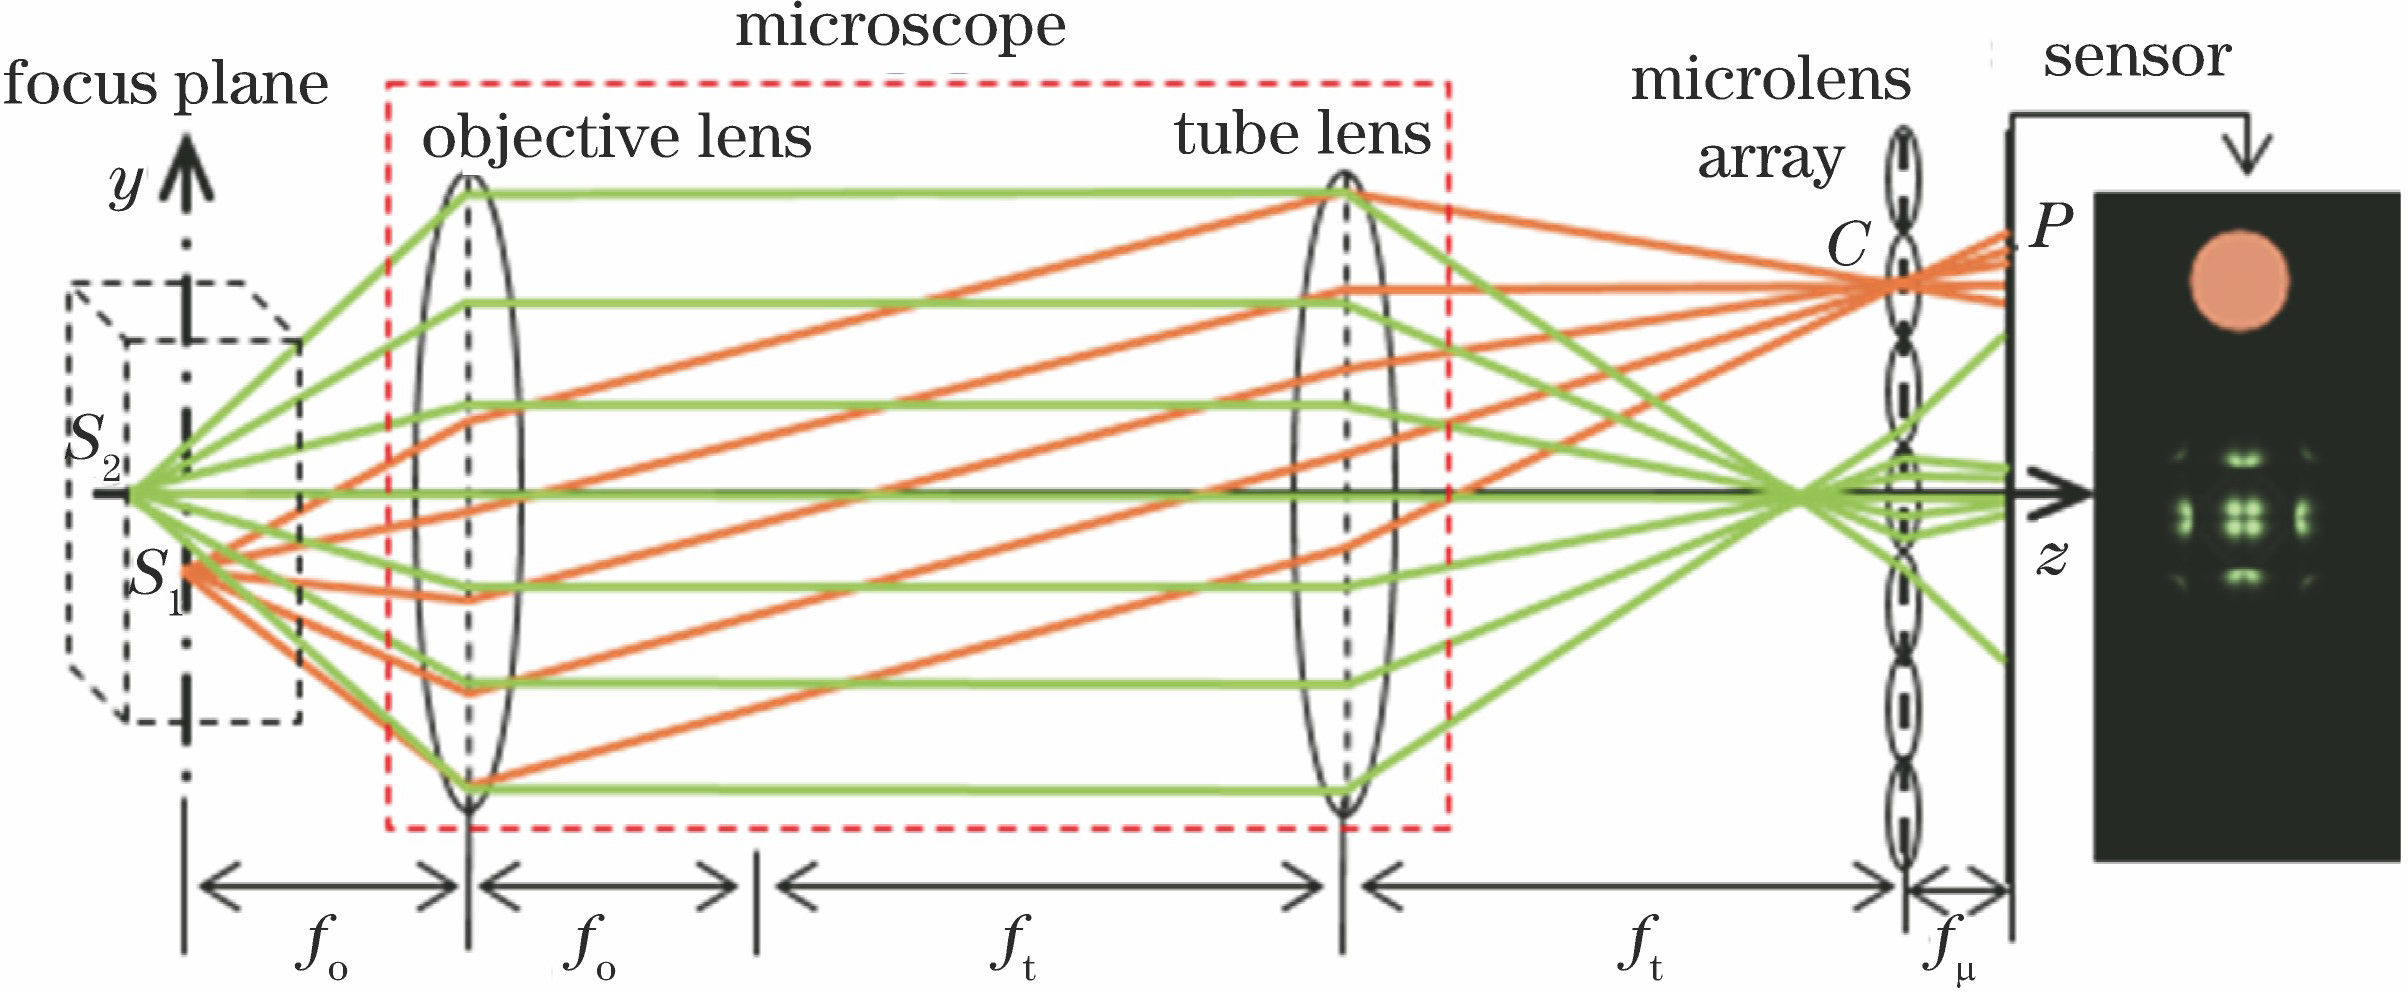 Schematic of the light field microscopic imaging (fo, ft and fμ are the focal length of the objective lens, the tube lens and the microlens, respectively)